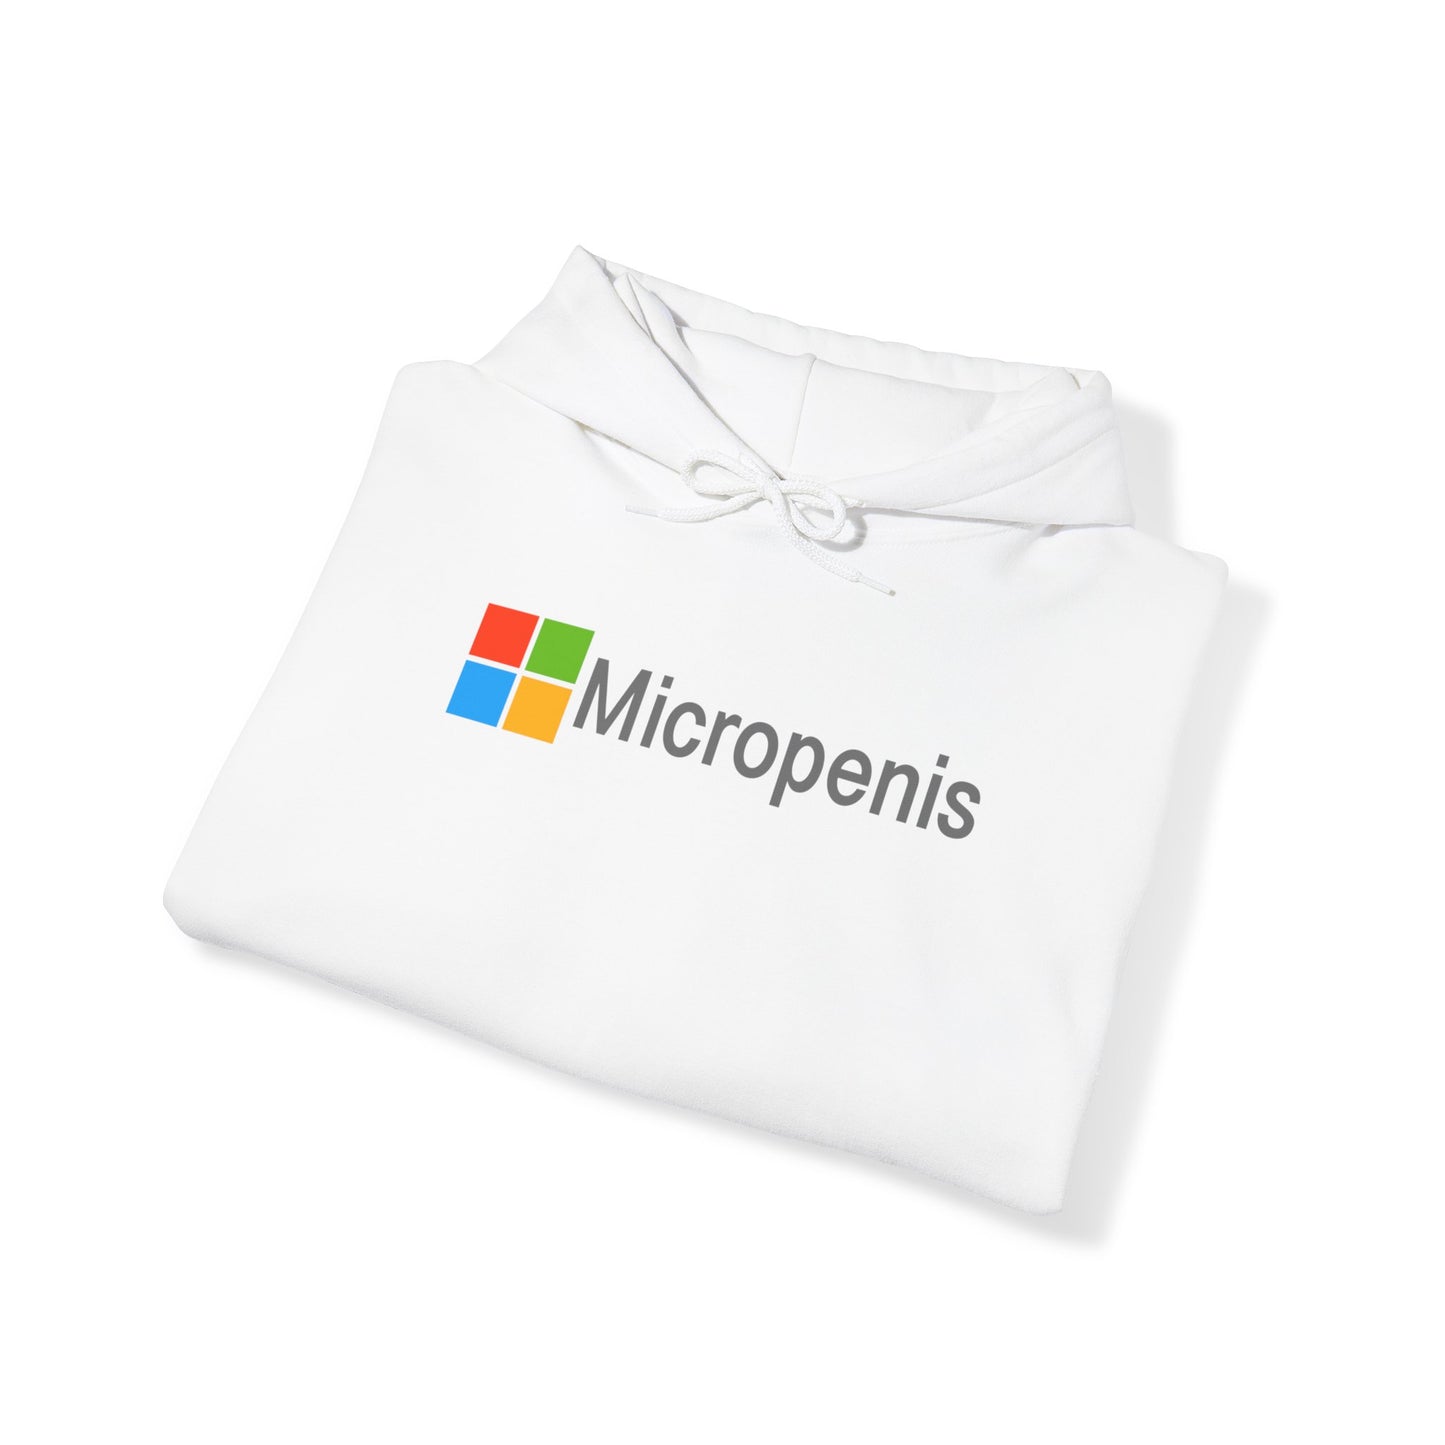 Micropenis